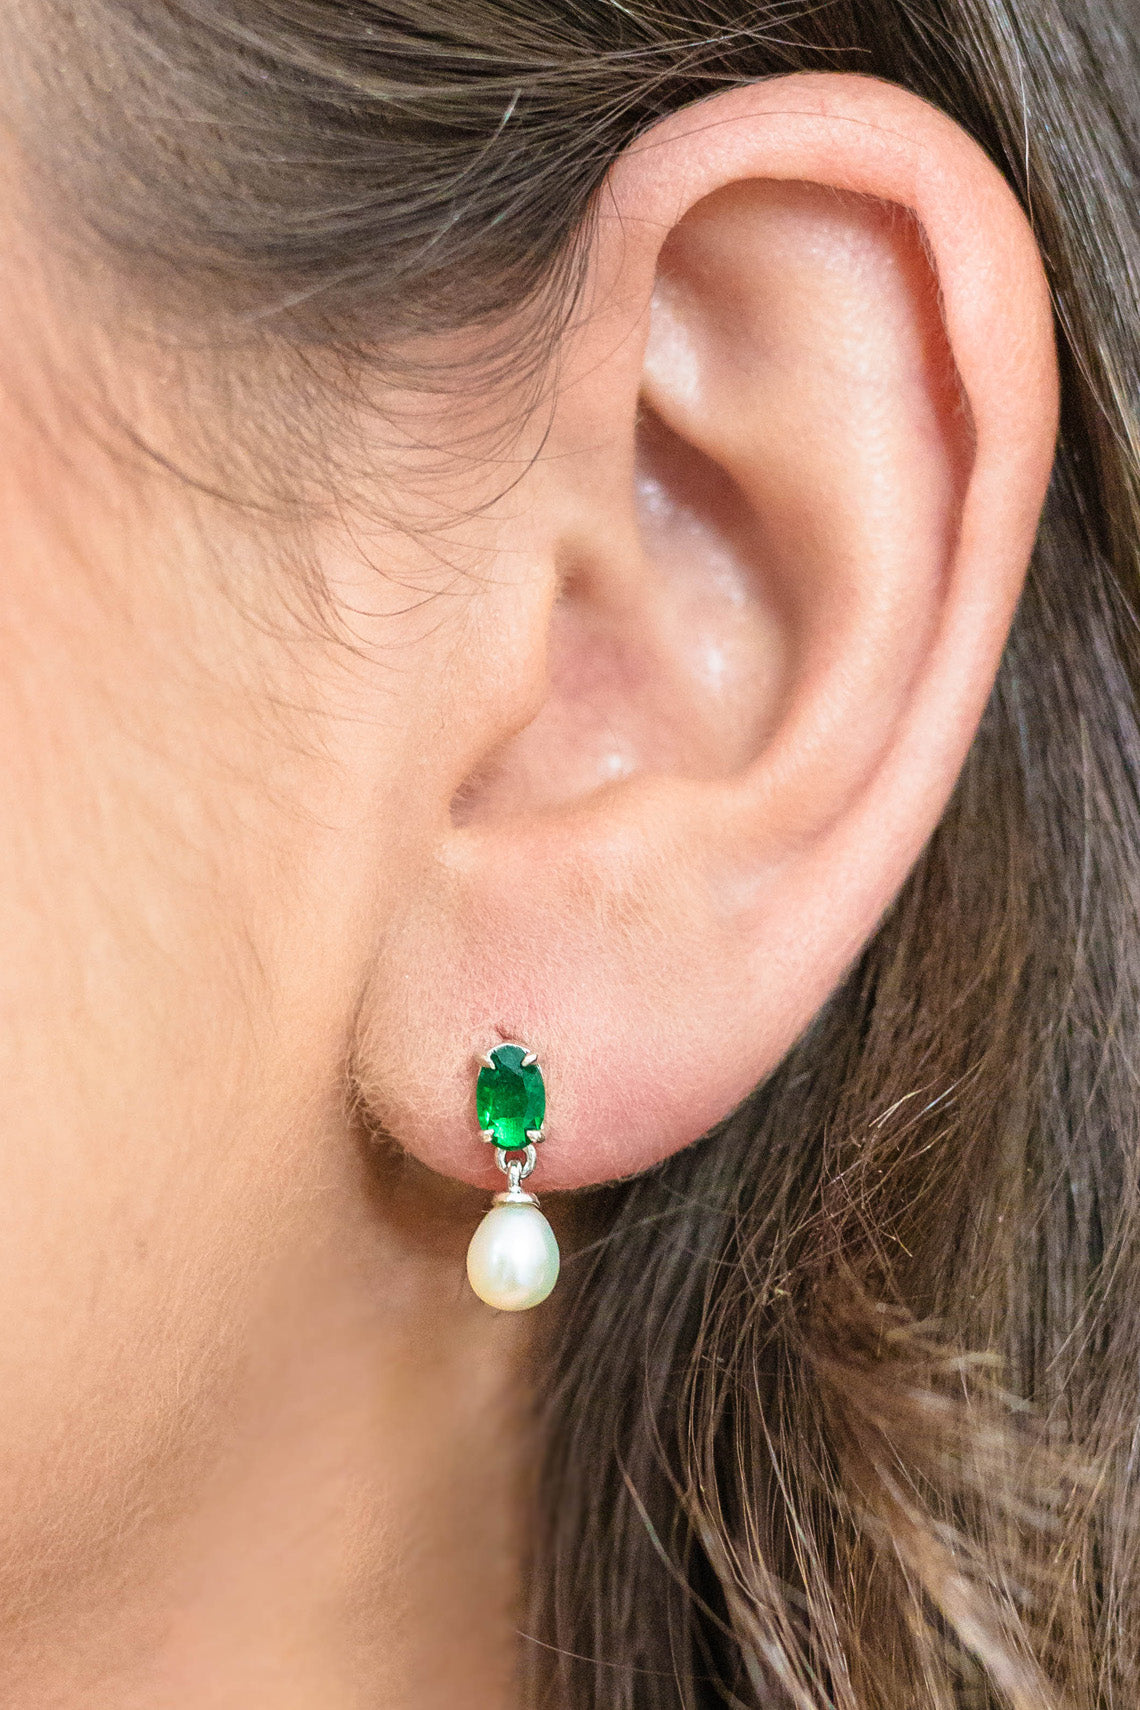 OCEANS WHITSUNDAY EARRINGS EMERALD AND SILVER